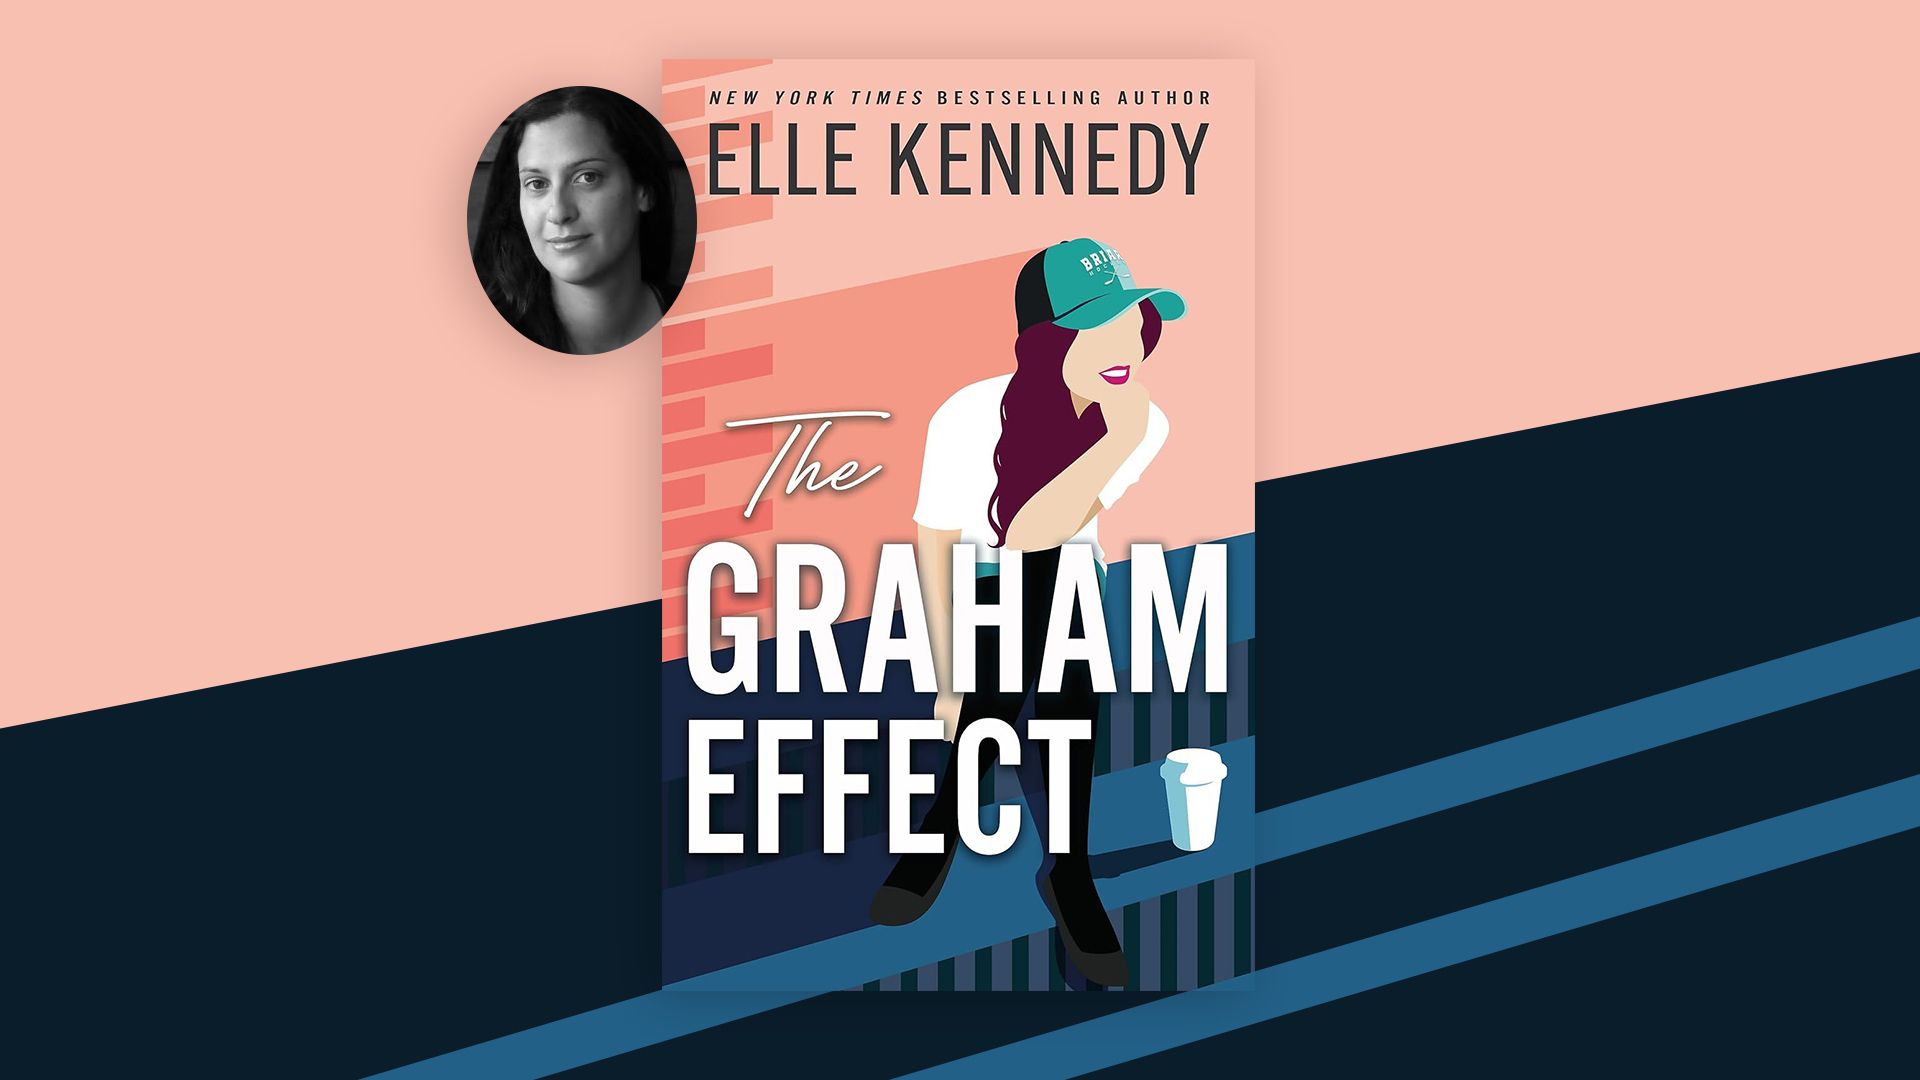 Elle Kennedy is the author of The Graham Effect